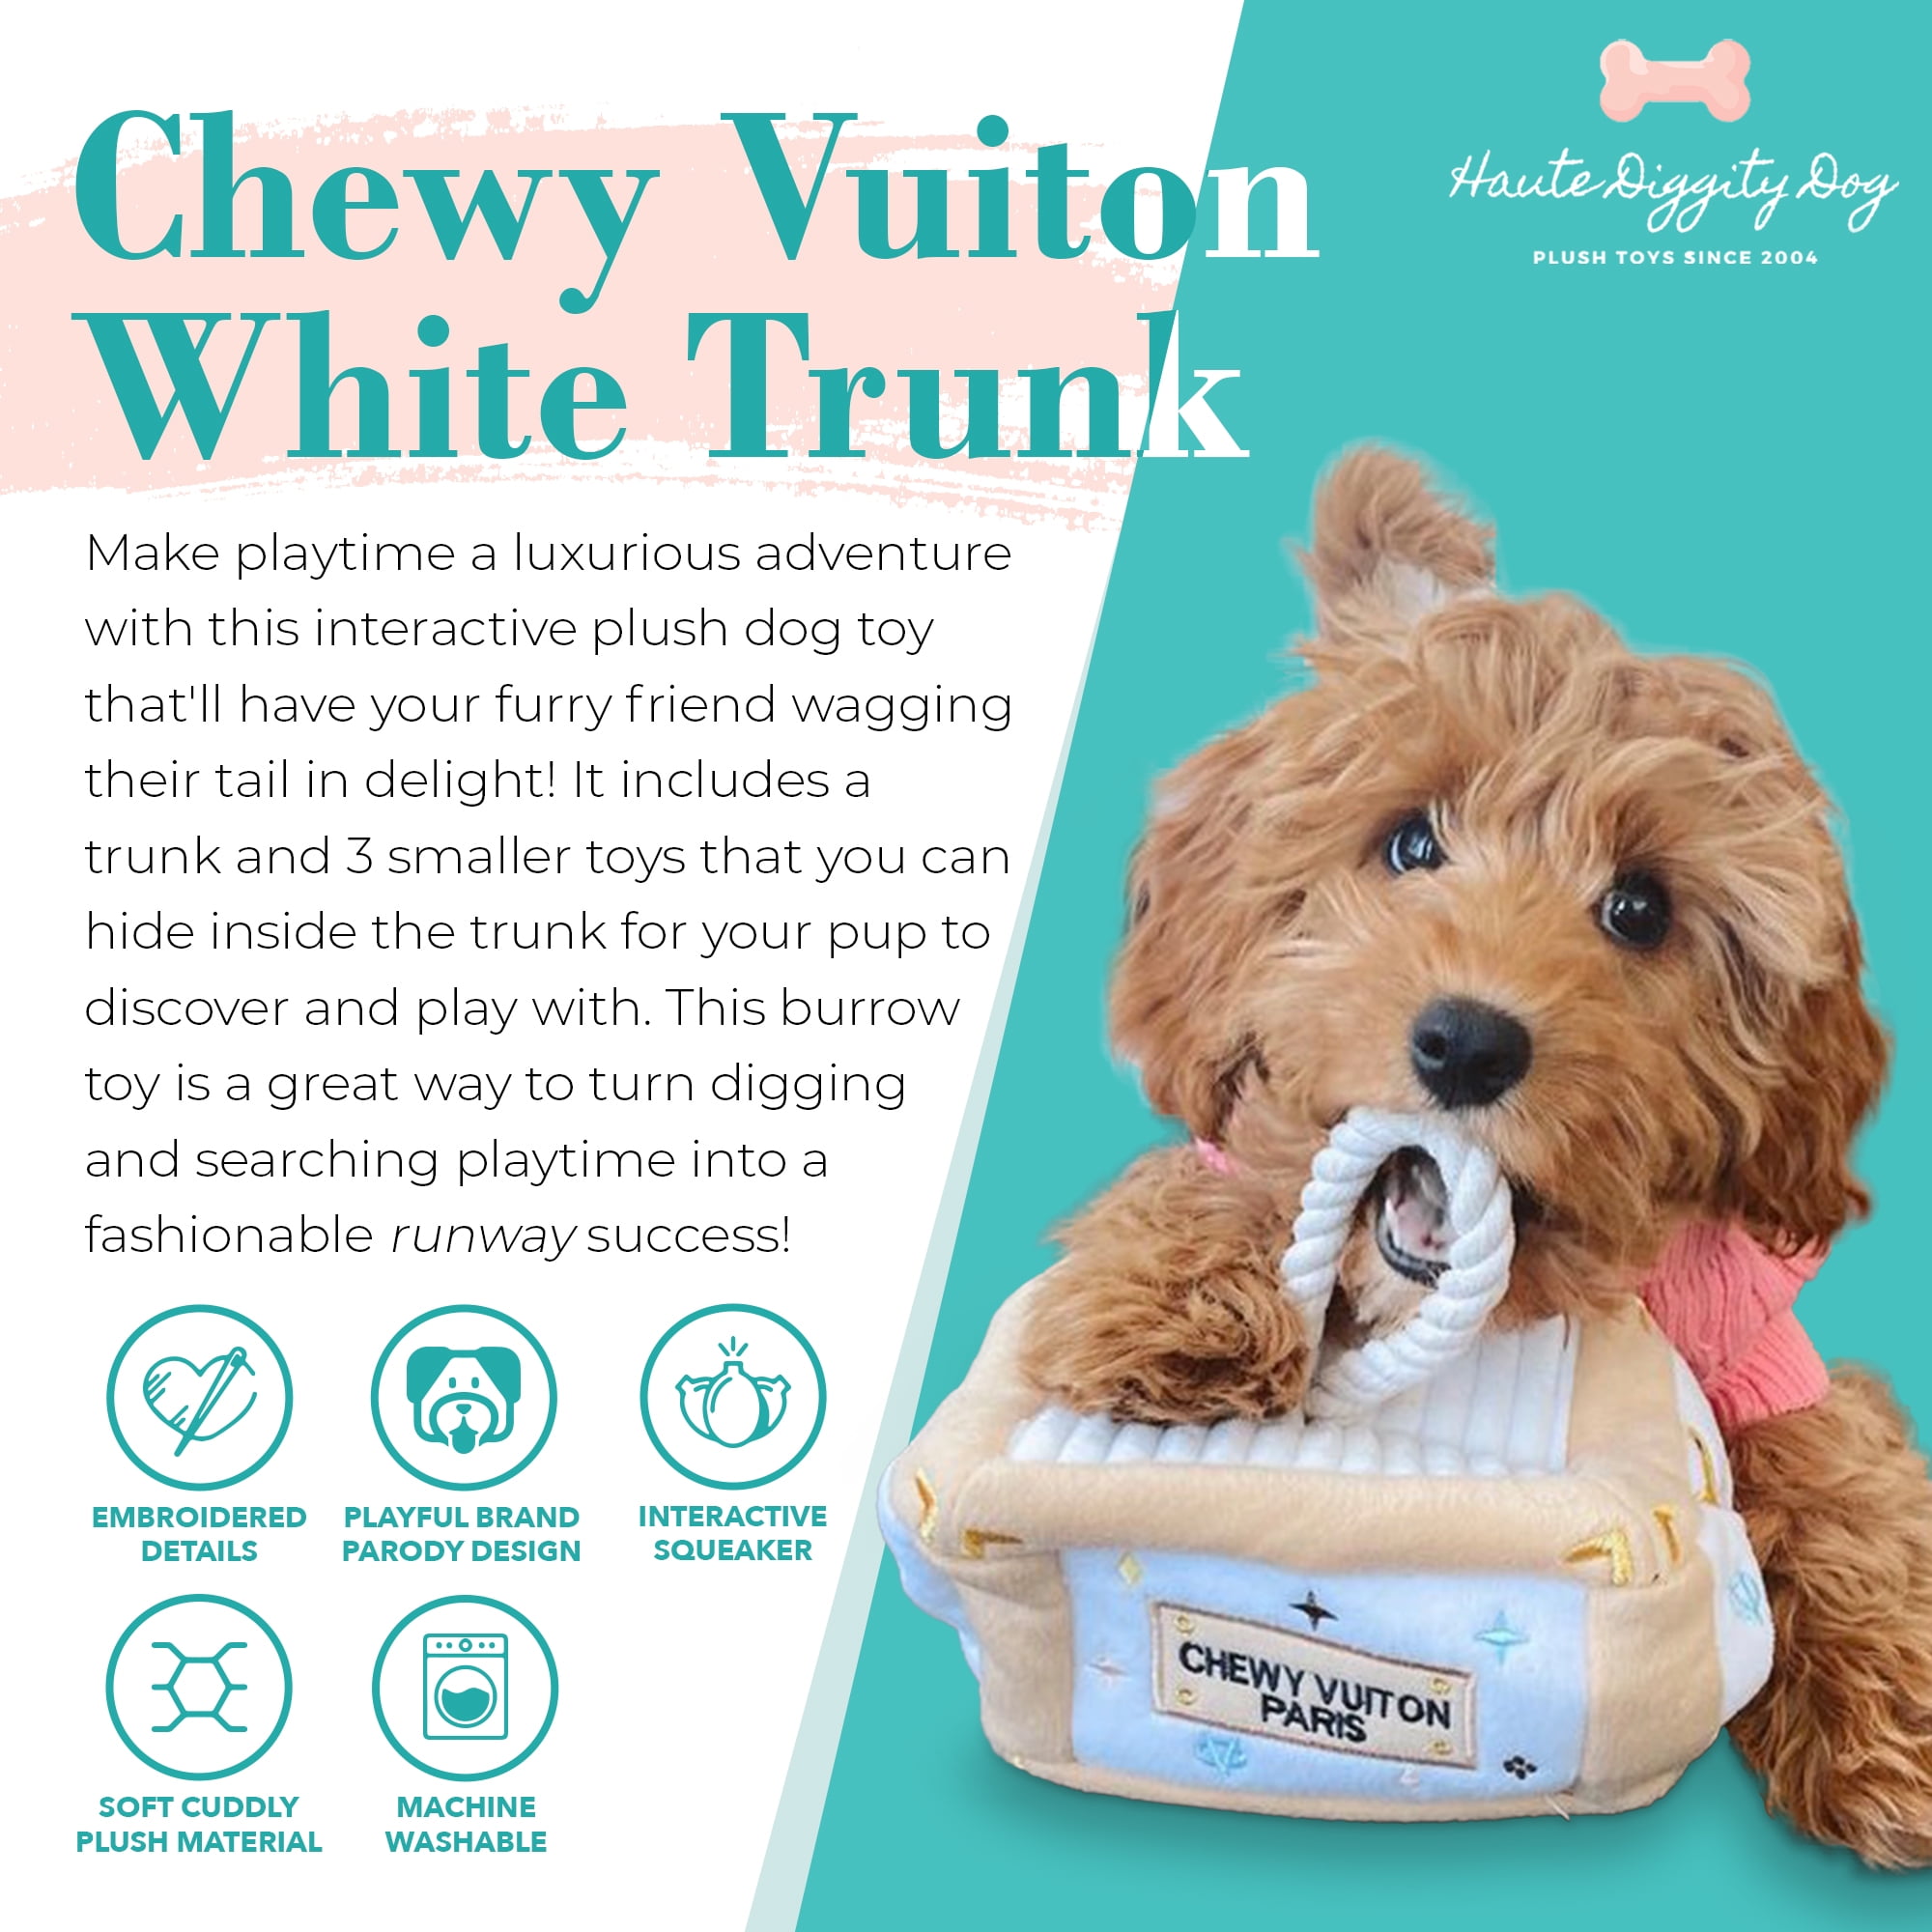 White Chewy Vuiton Bone with Squeaker - 3 sizes